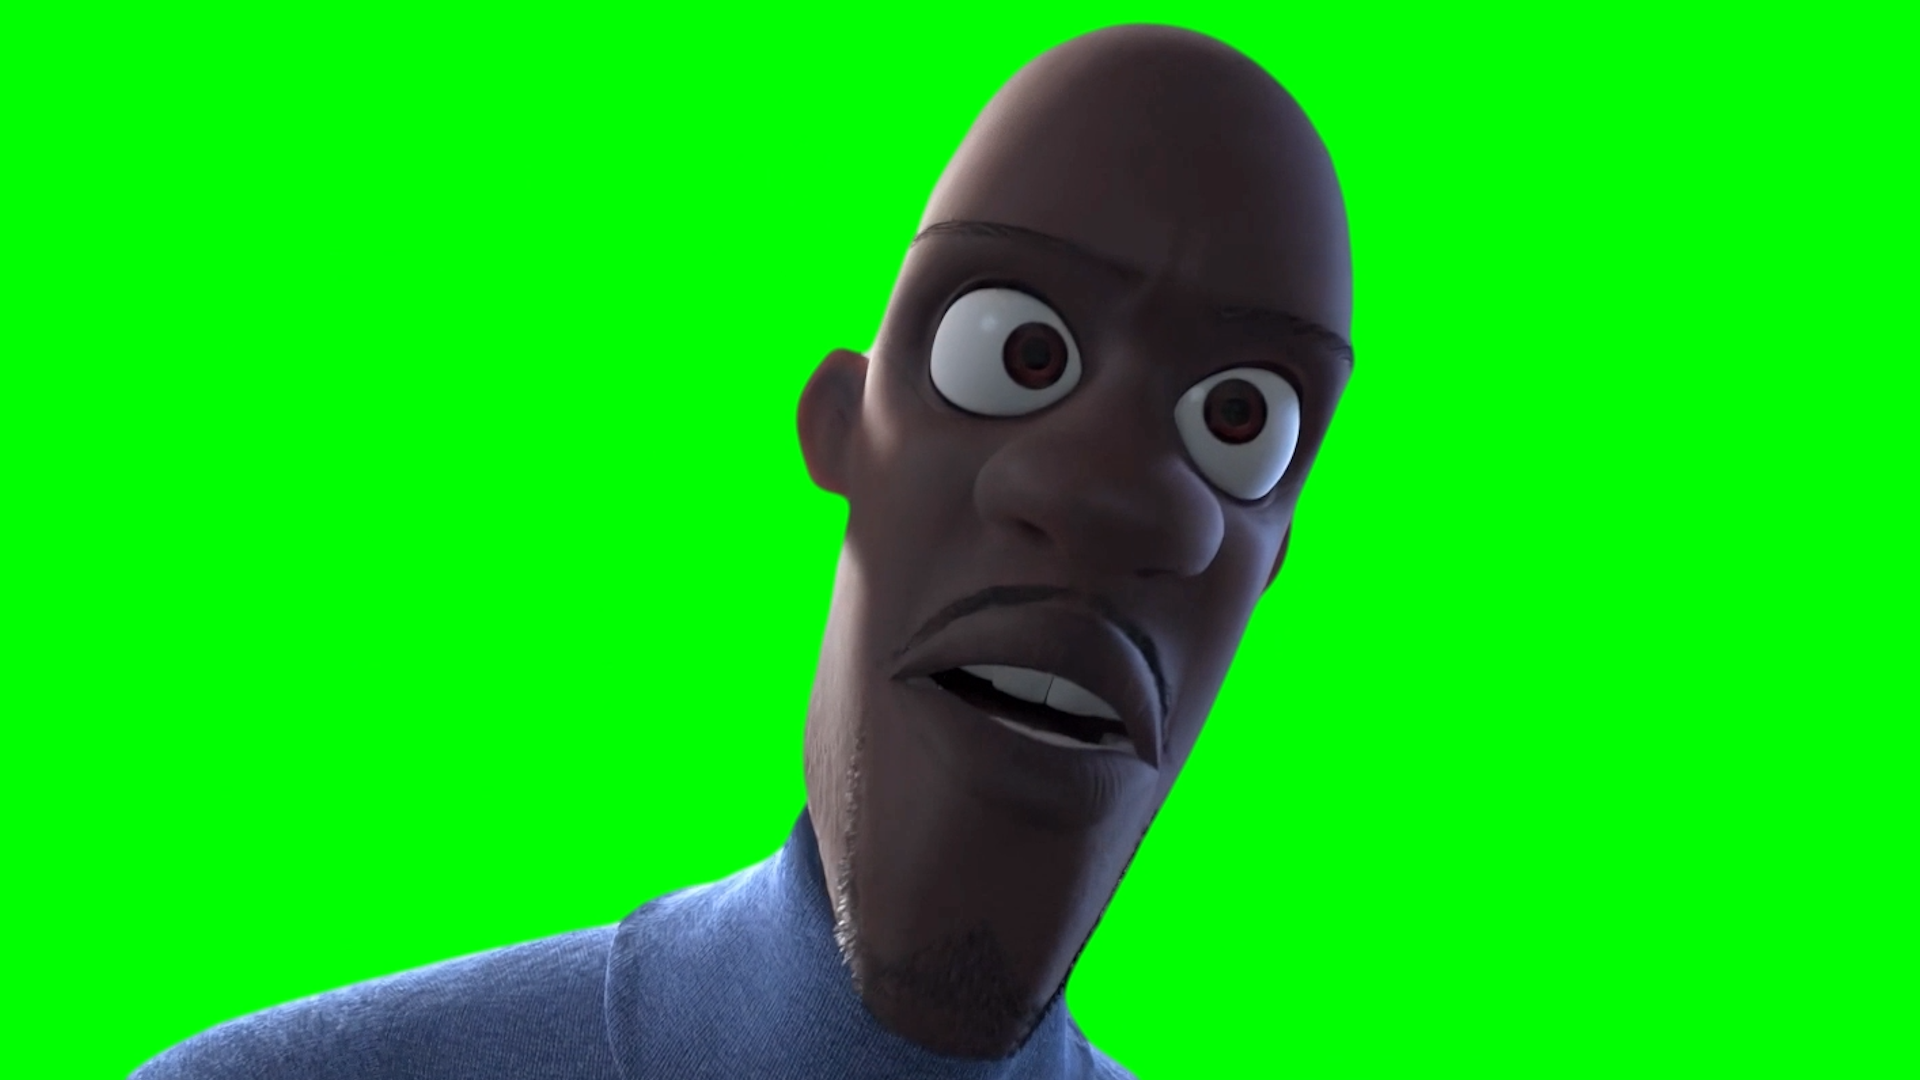 WHERE IS MY SUPER SUIT! - Frozone The Incredibles meme (Green Screen)